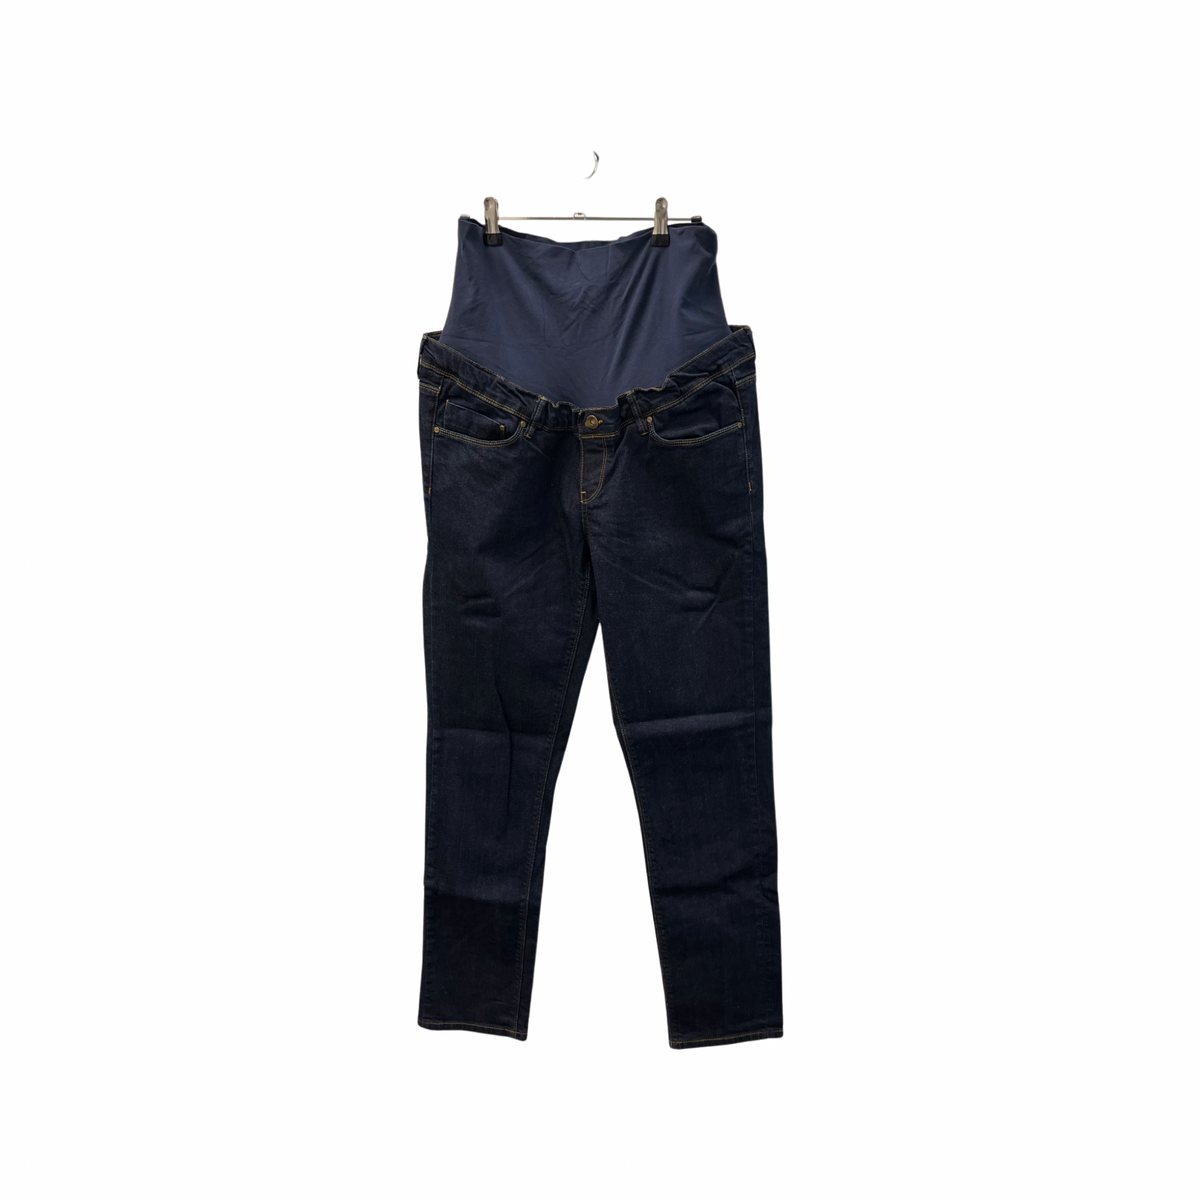 npps - Size 31 – Boreal Kids Consignment